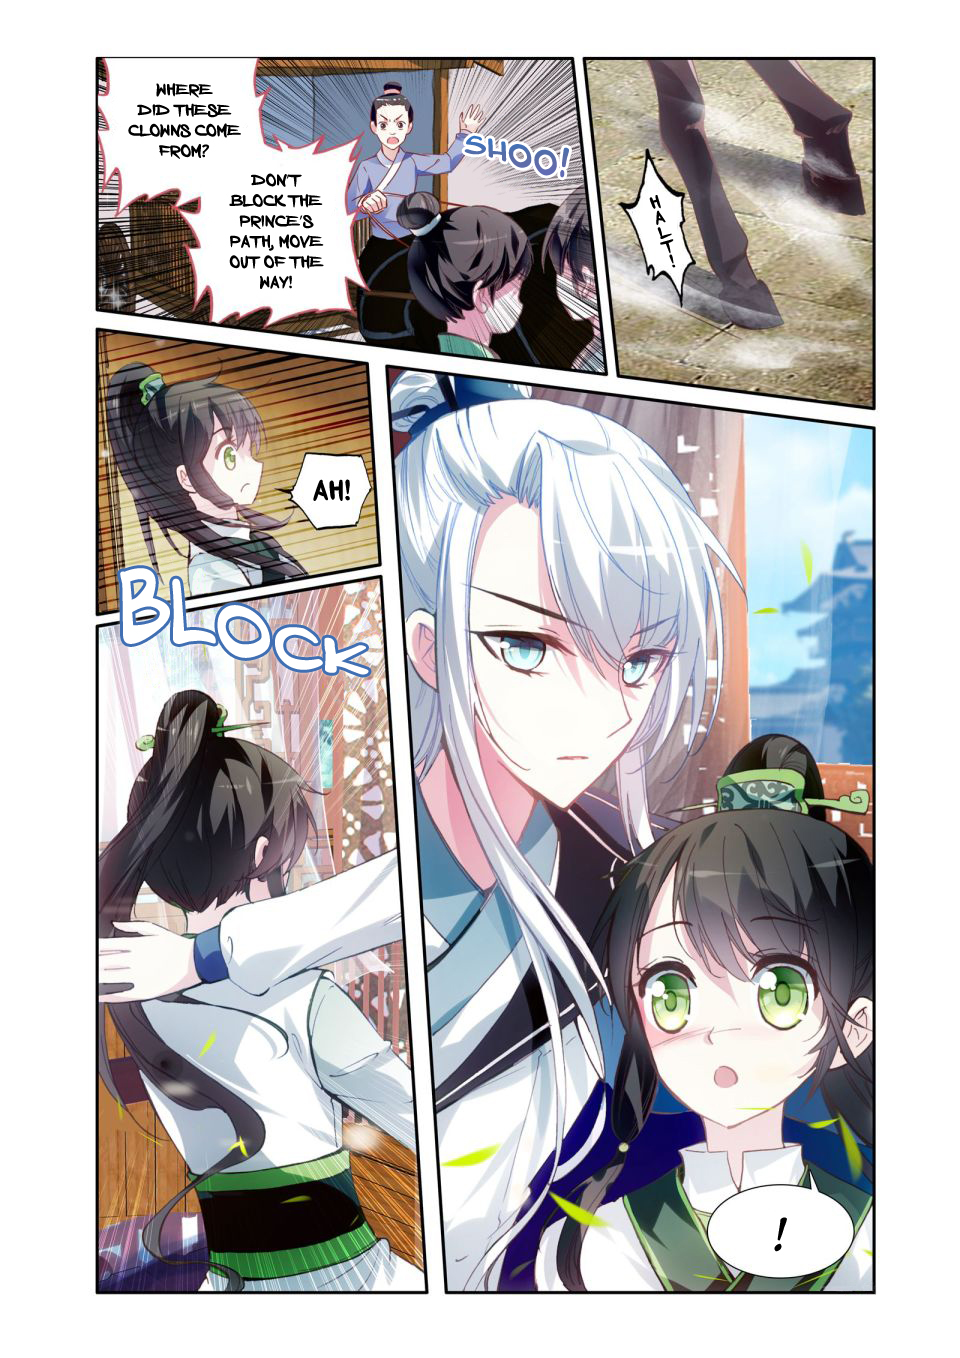 Detective Lady Ch. 13